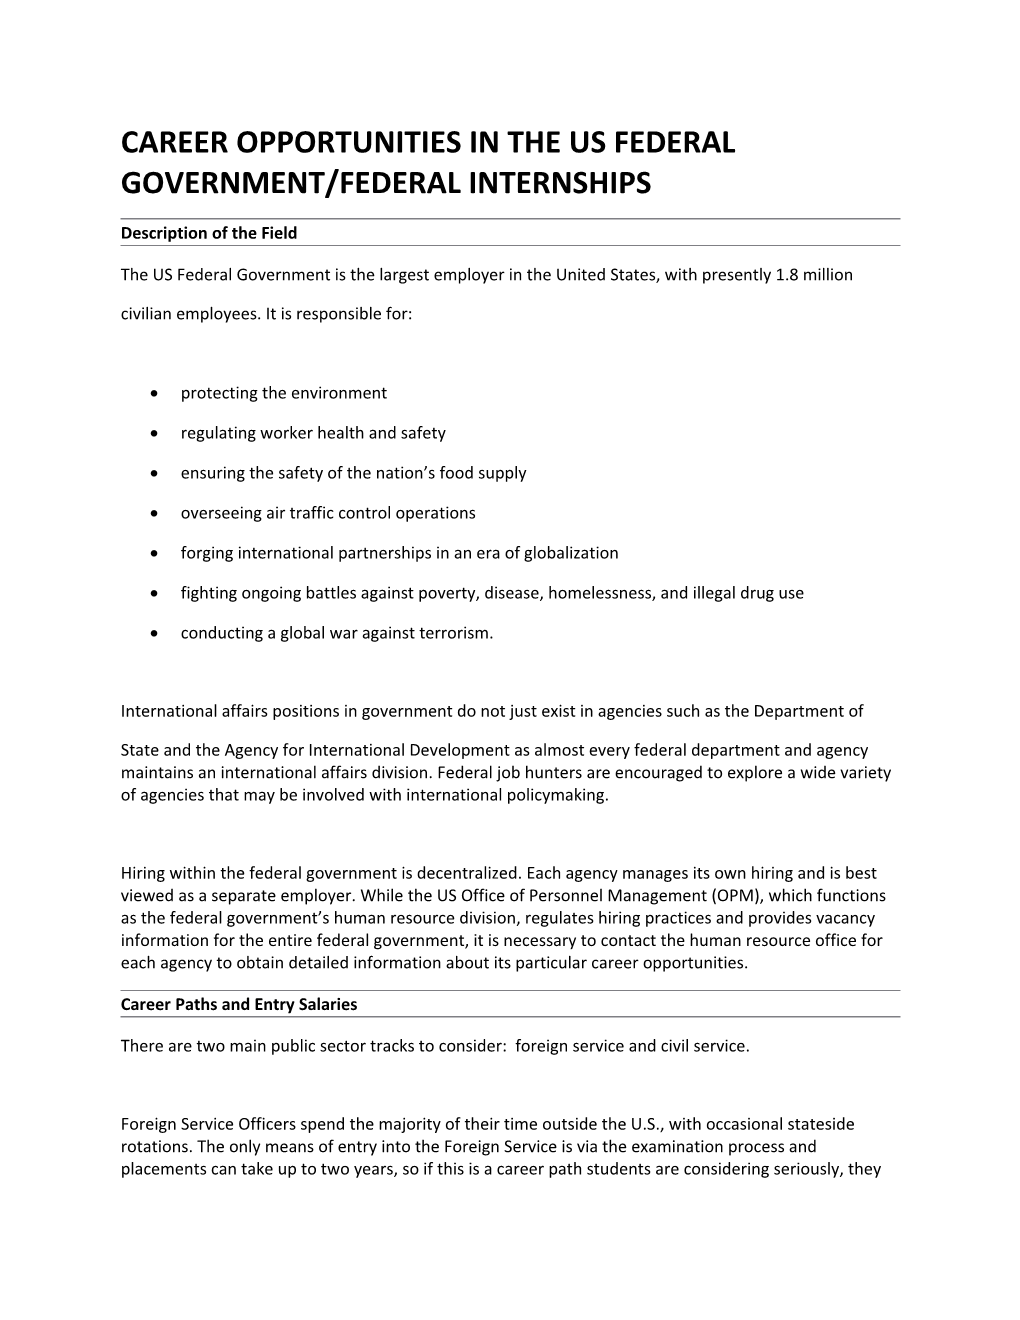 Career Opportunities in the Us Federal Government/Federal Internships